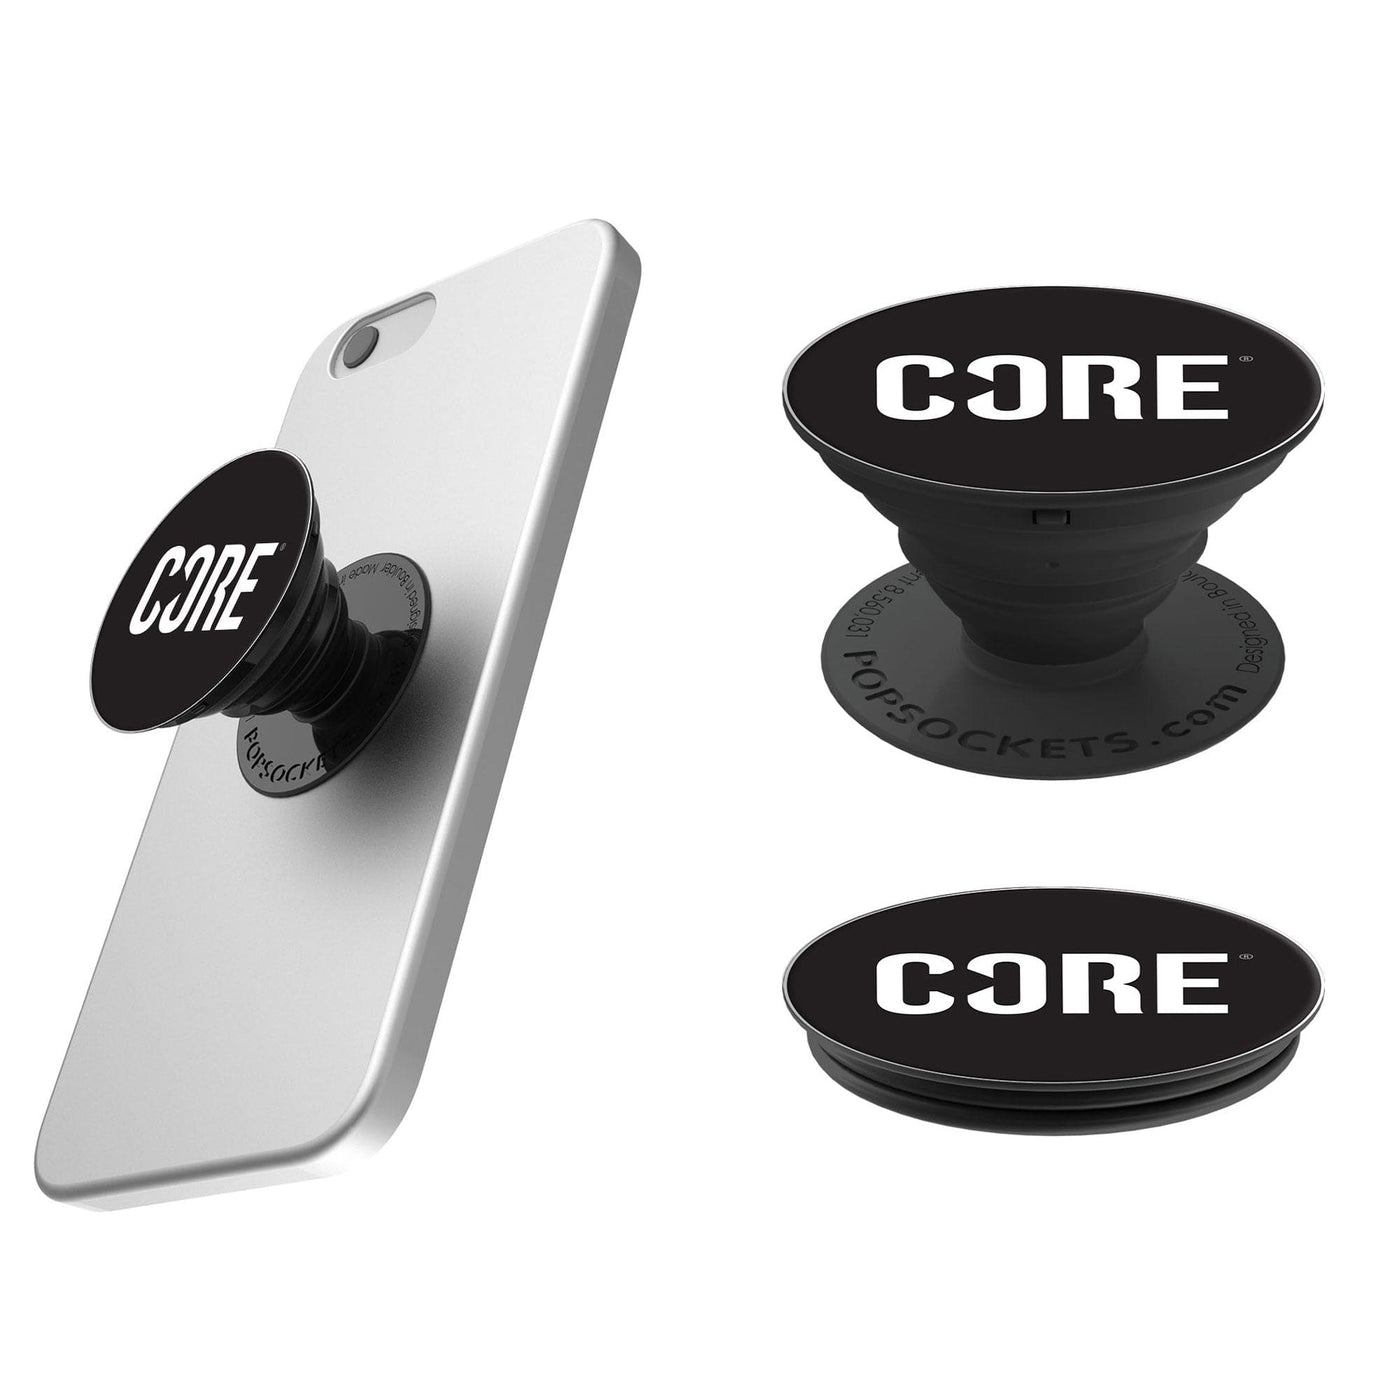 CORE x PopSockets Phone Stand/Holder - Black 5056421911543